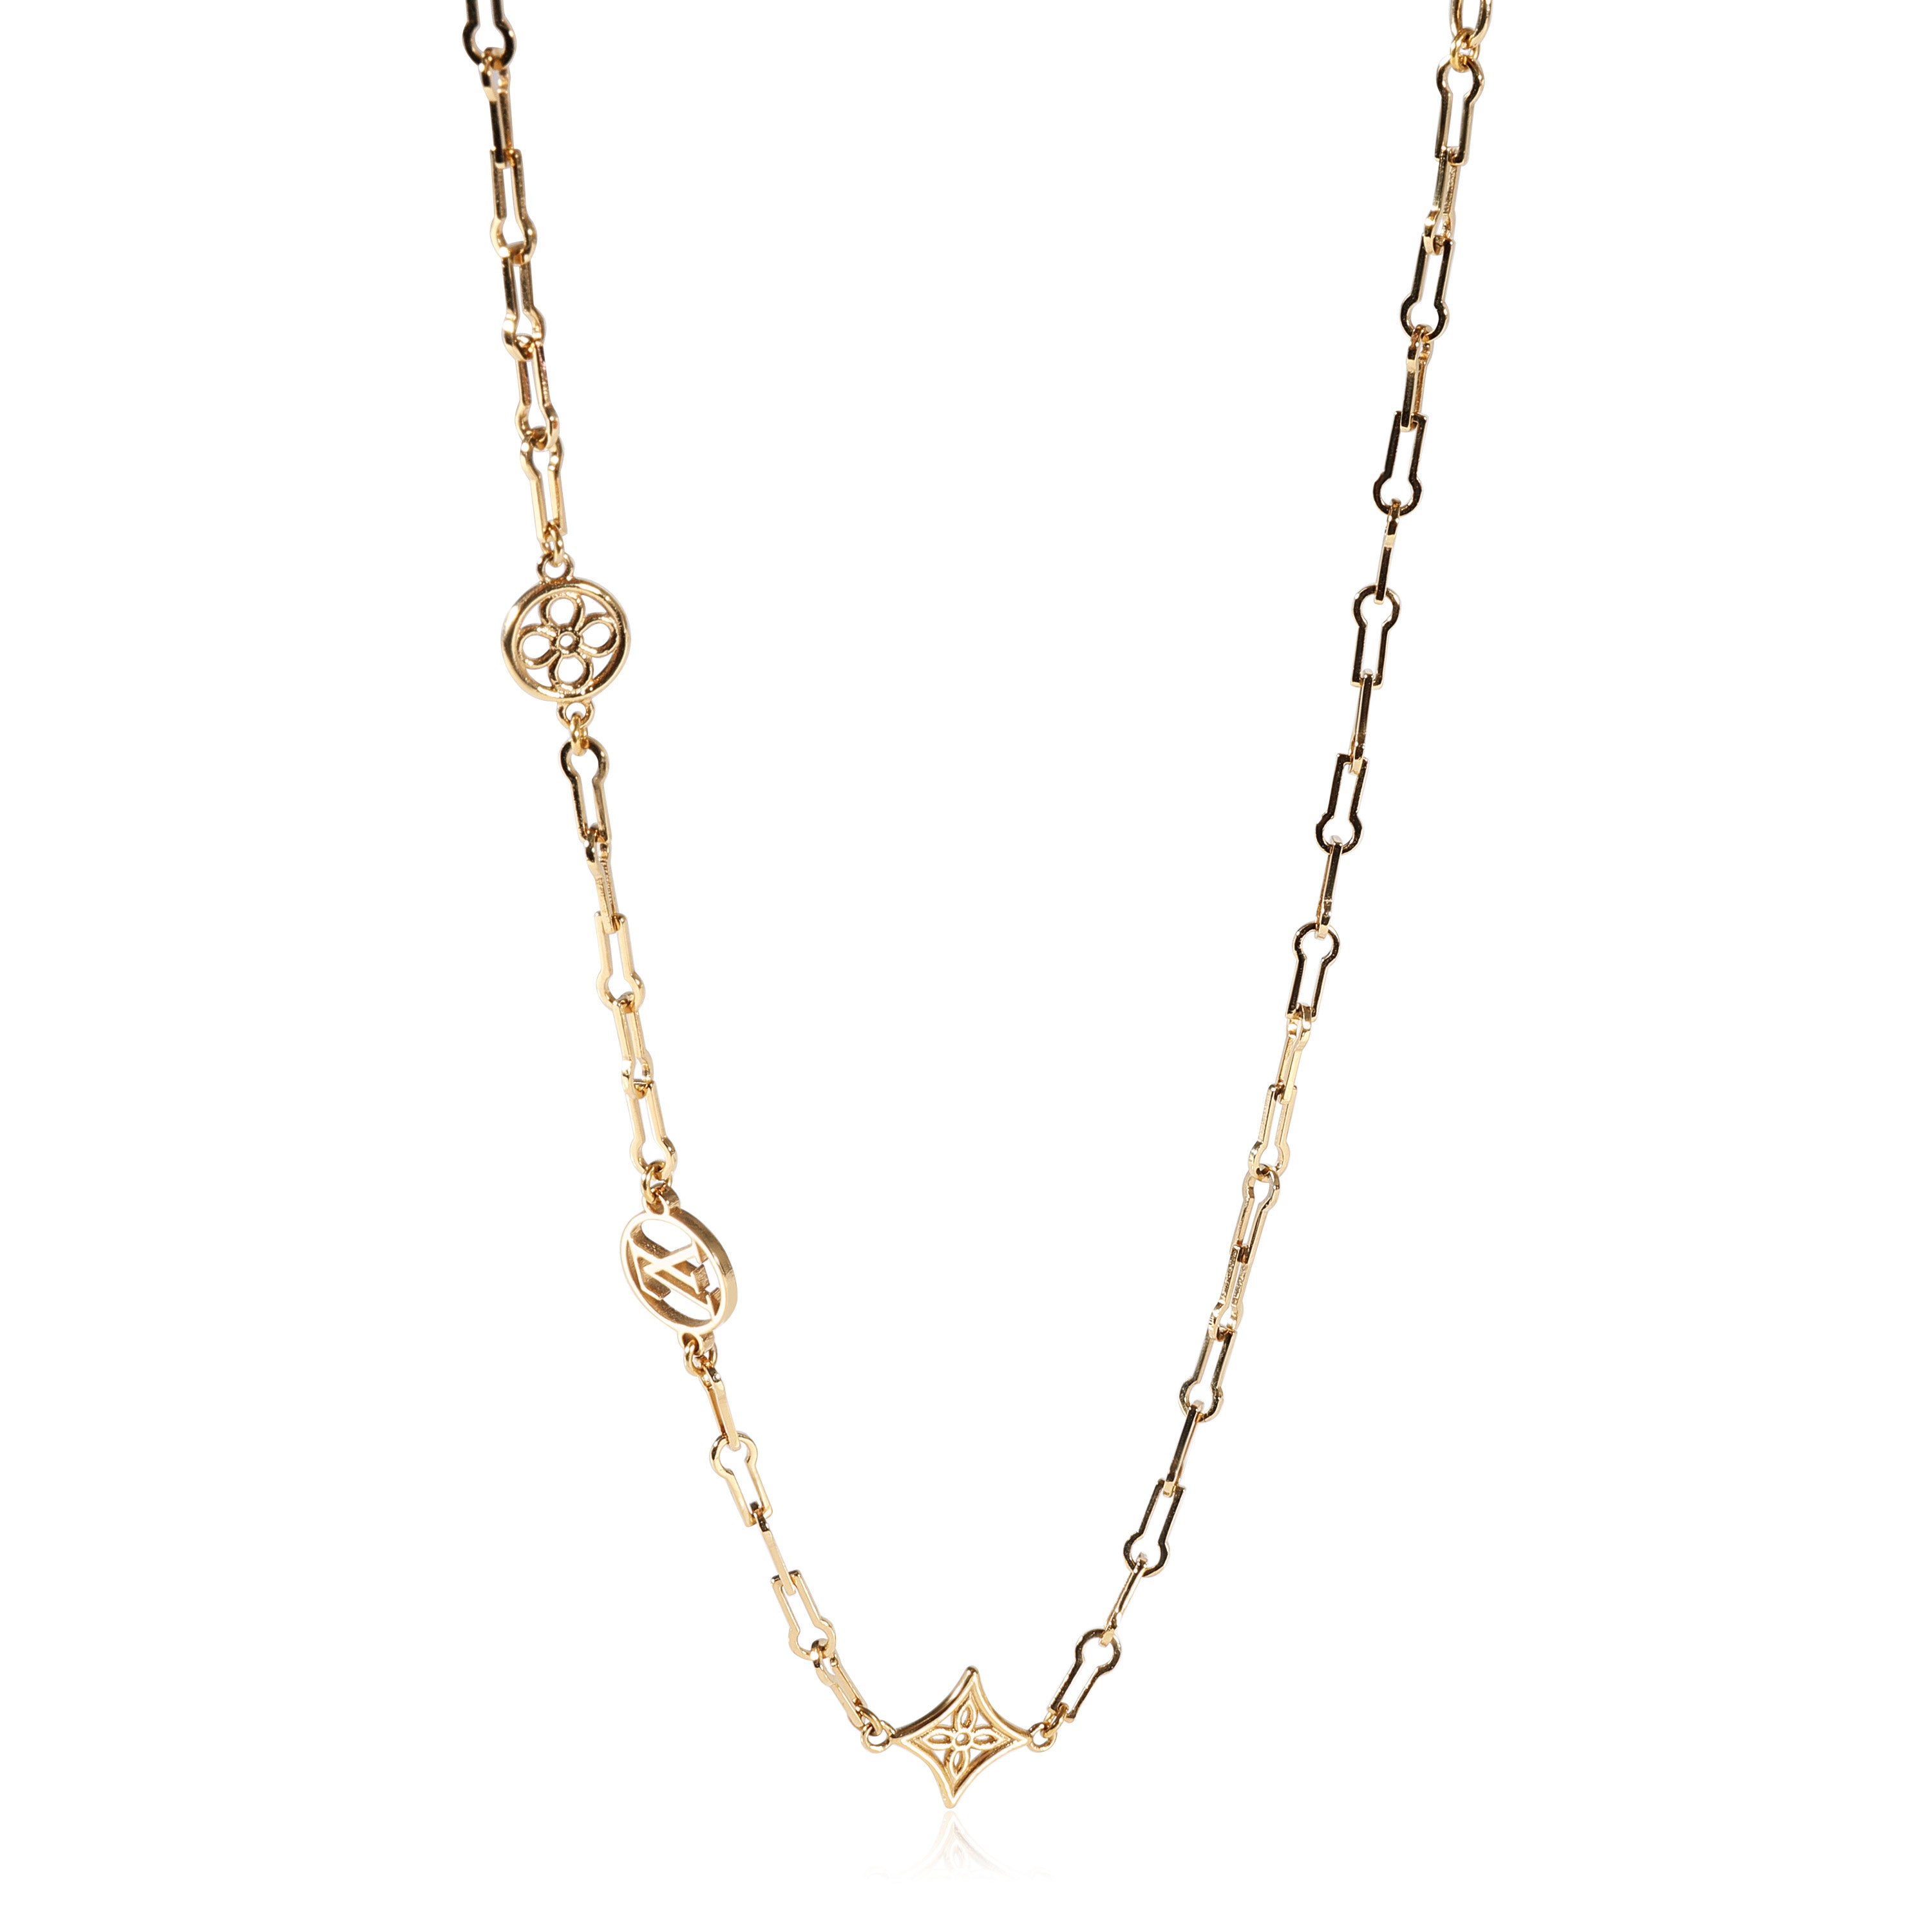 LOUIS VUITTON Monogram Forever Young Choker Gold 956860